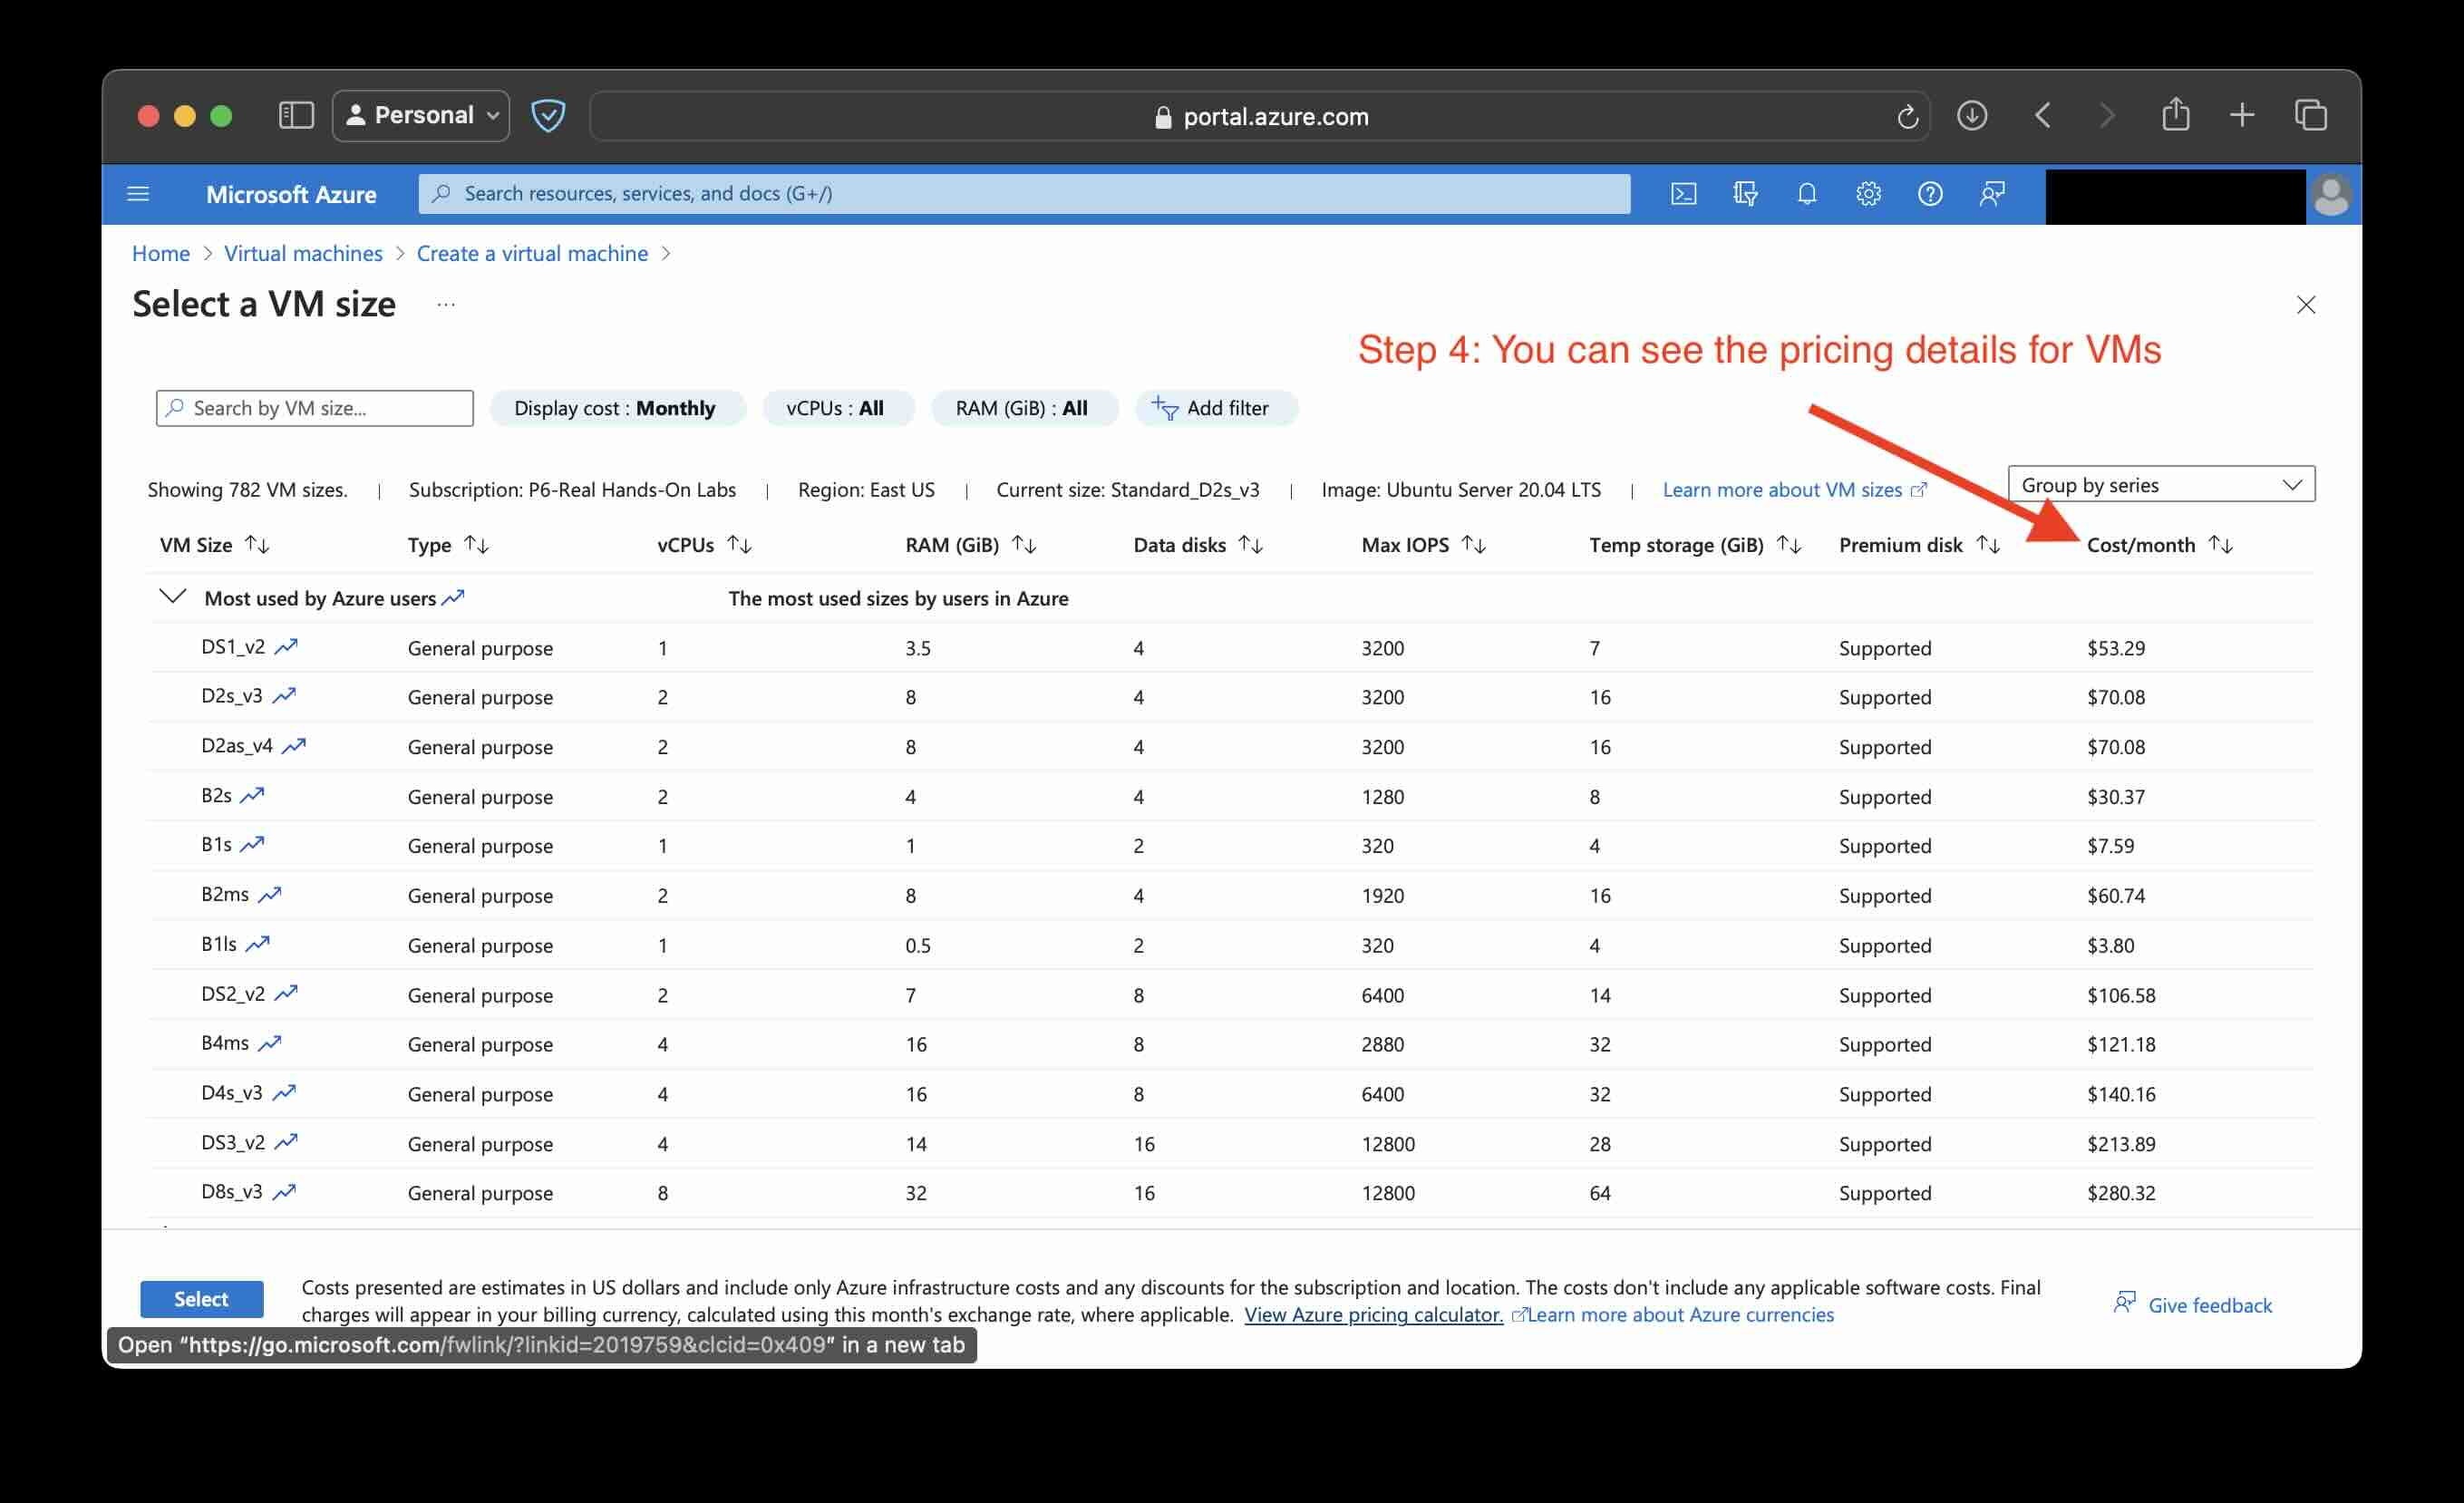 Step 4 - You can see Pricing details for Azure VMs as cost per month